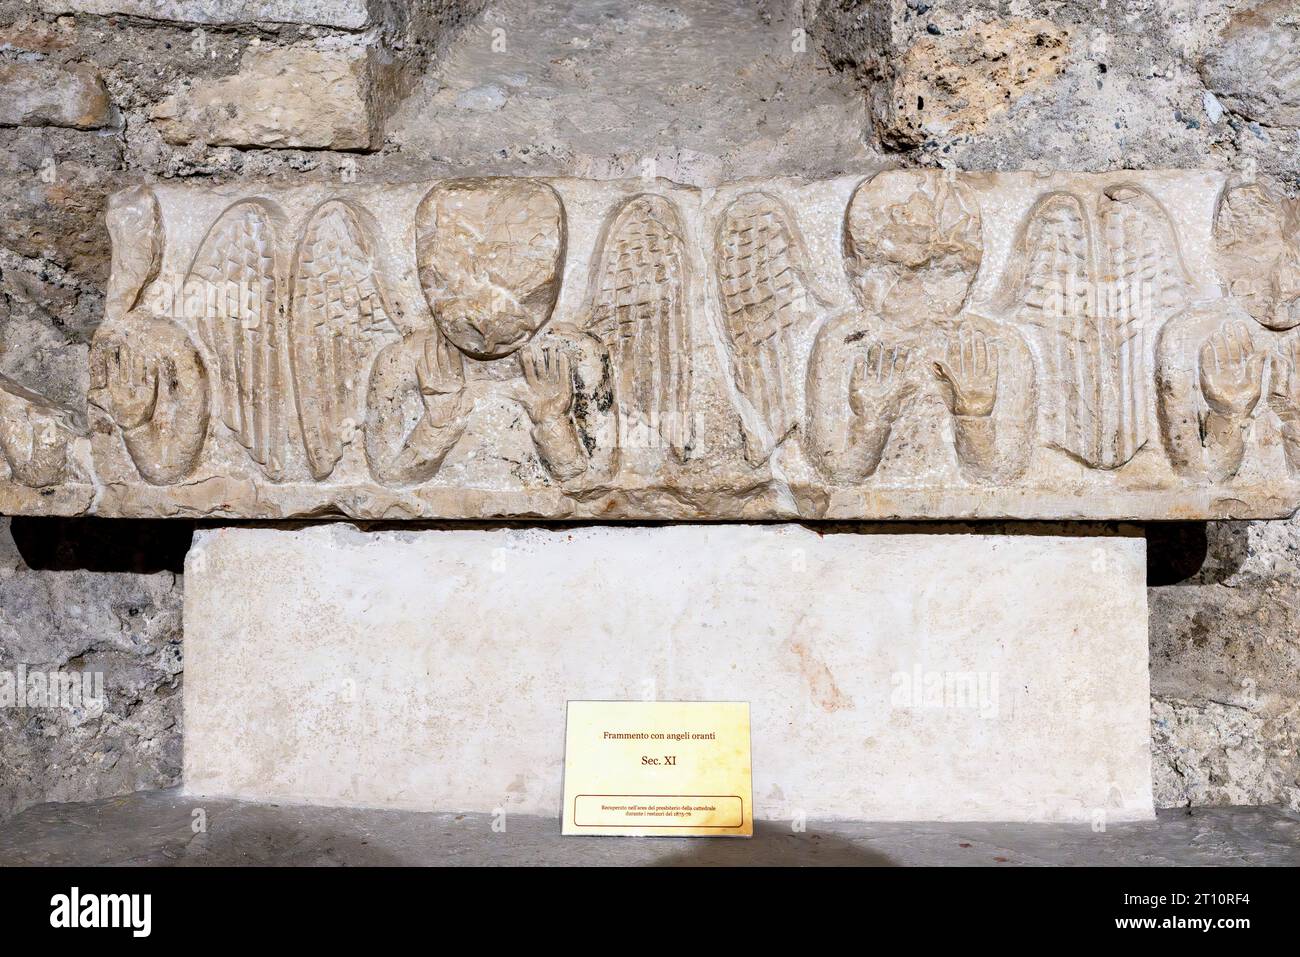 Fragment with decorative angels dating from the 11th century exhibited inside the crypt below the Ventimiglia cathedral,  Liguria, Italy. Stock Photo